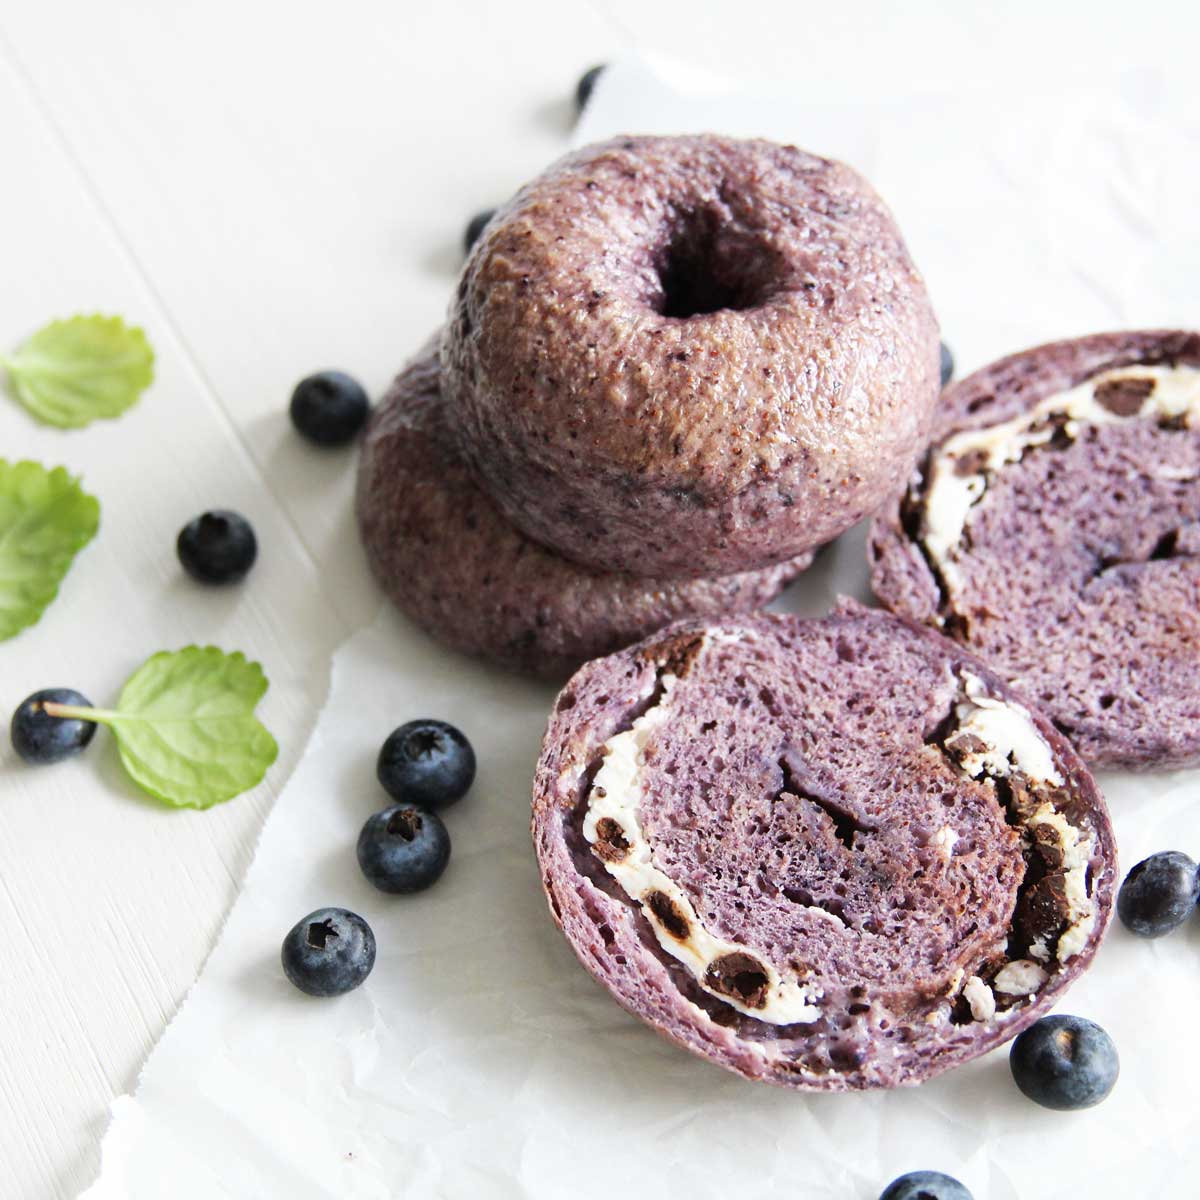 Chocolate Chip Blueberry Bagels (Easy, Cream Cheese Stuffed Bagel Recipe) - Roasted Corn Naan